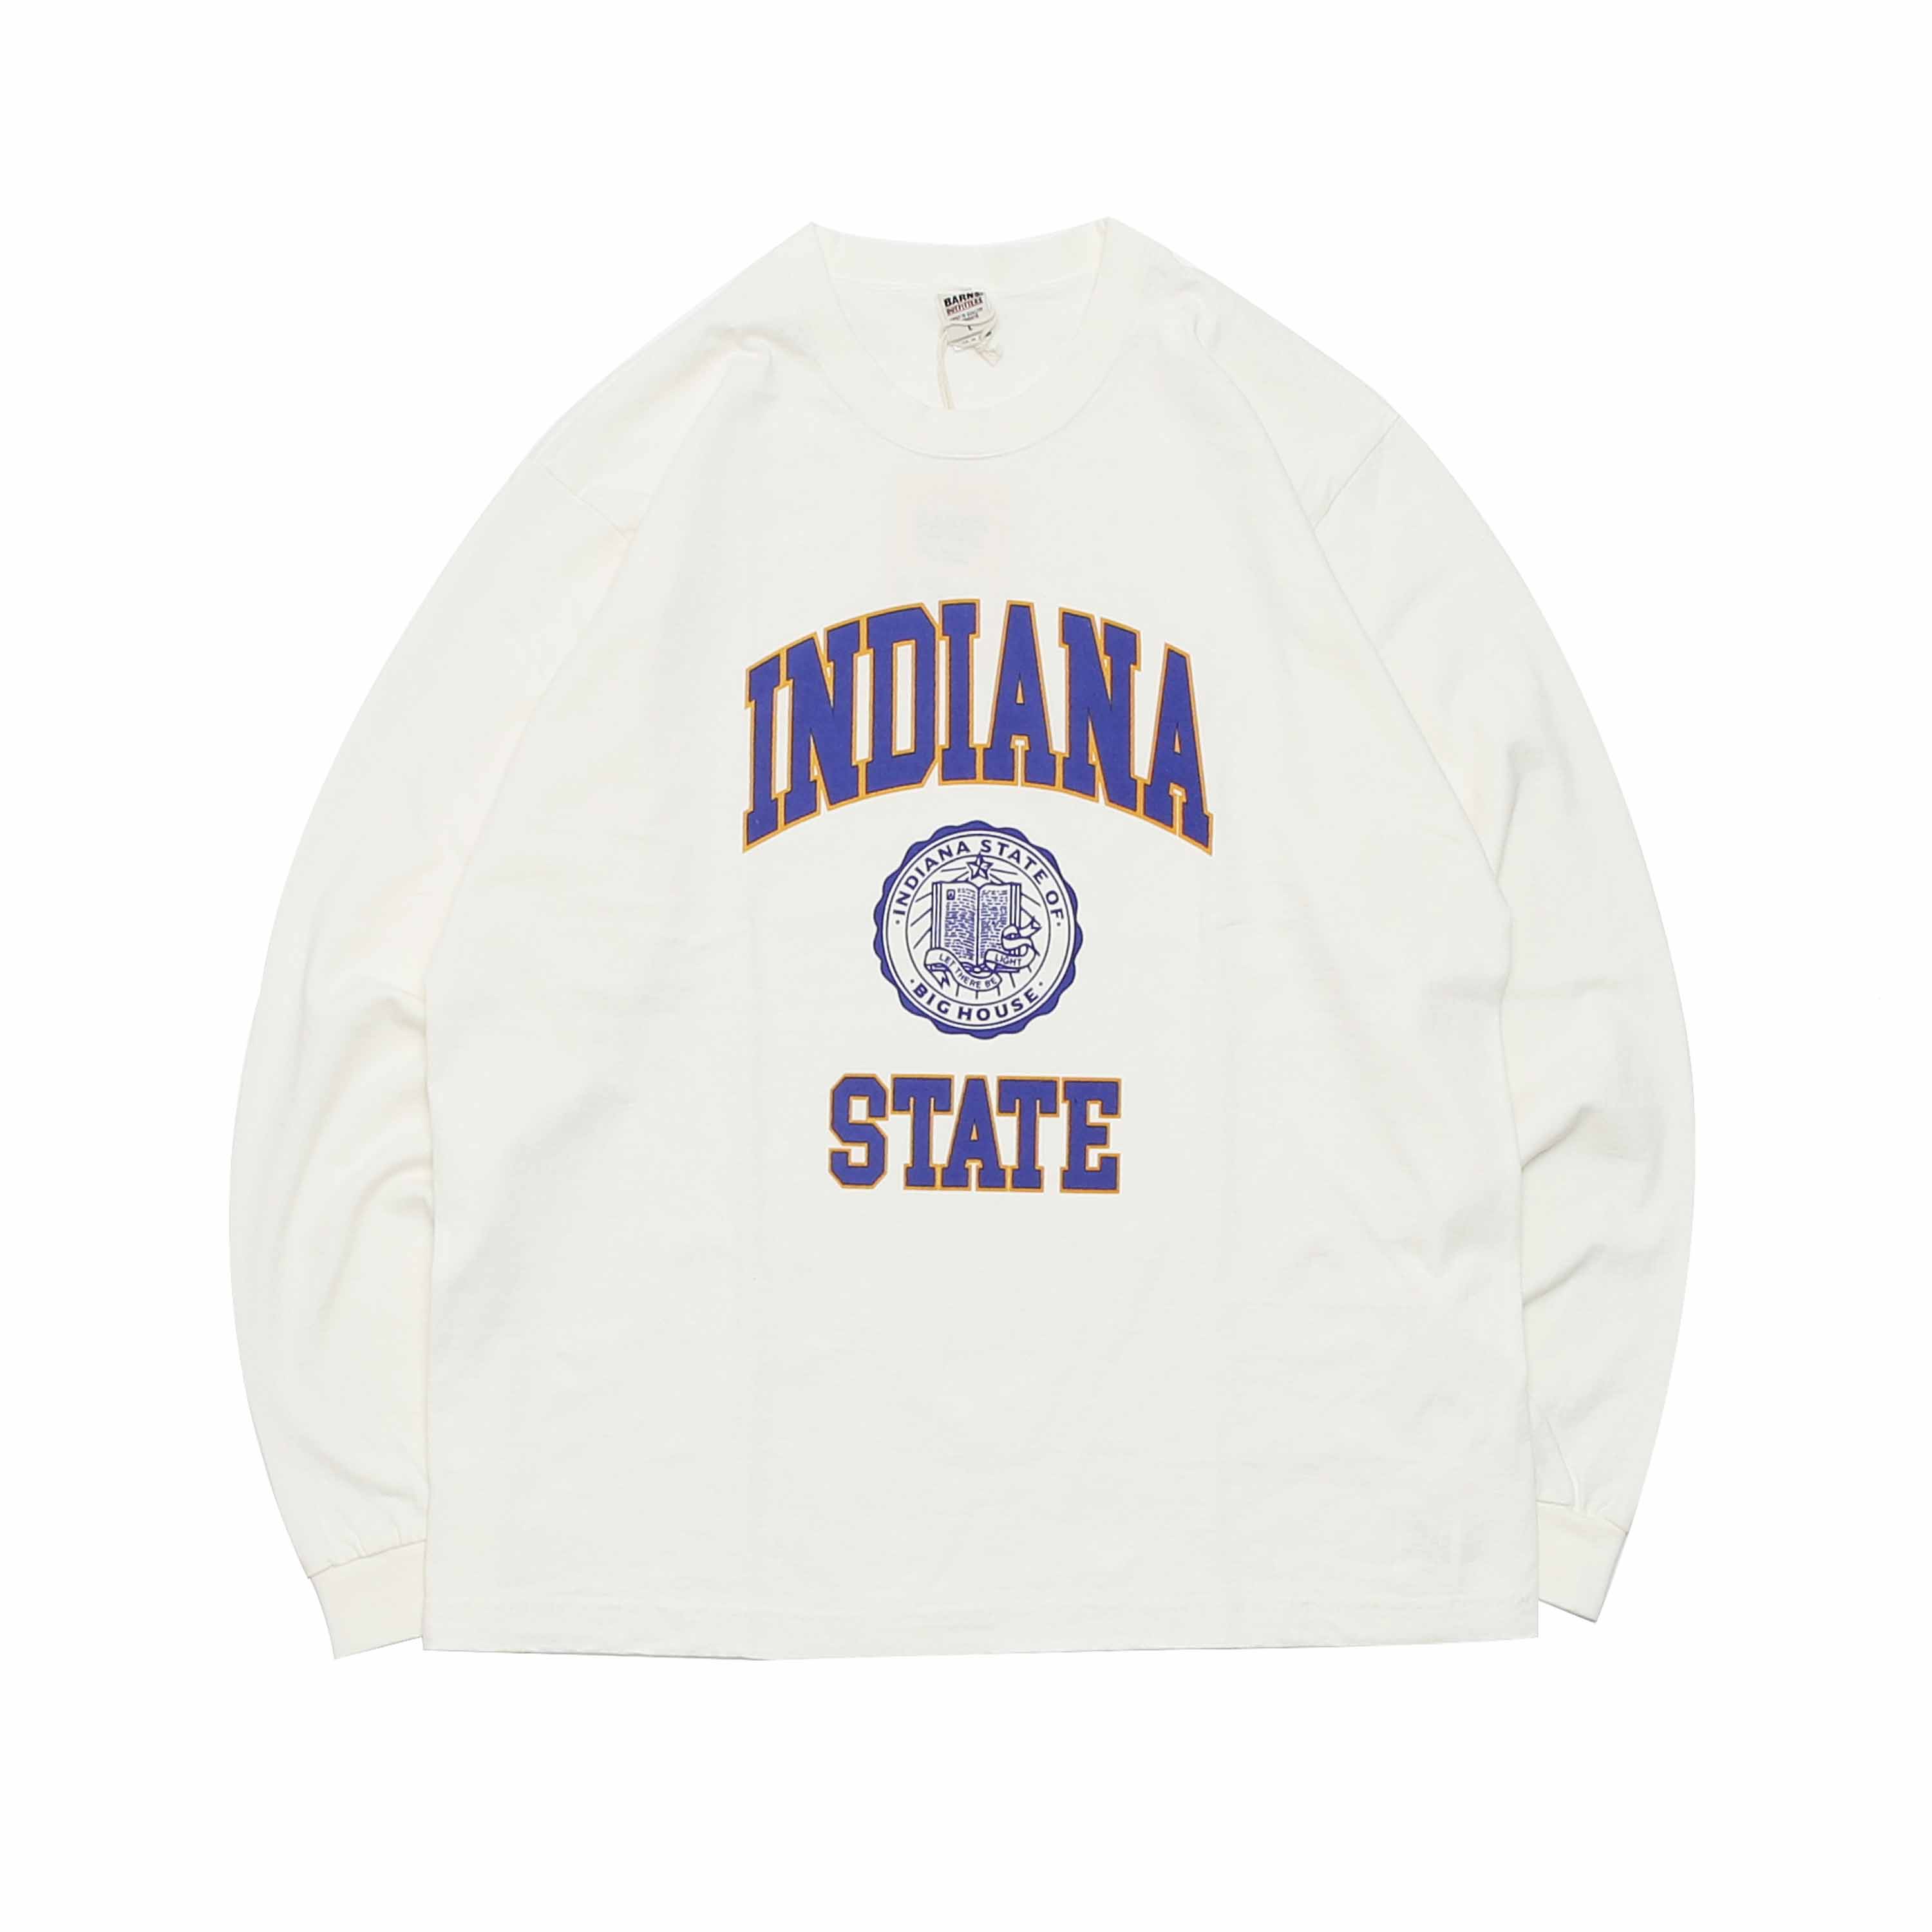 VINTAGE LIKE L/S PRINTED TEE - INDIANA STATE WHITE(BR-22313)